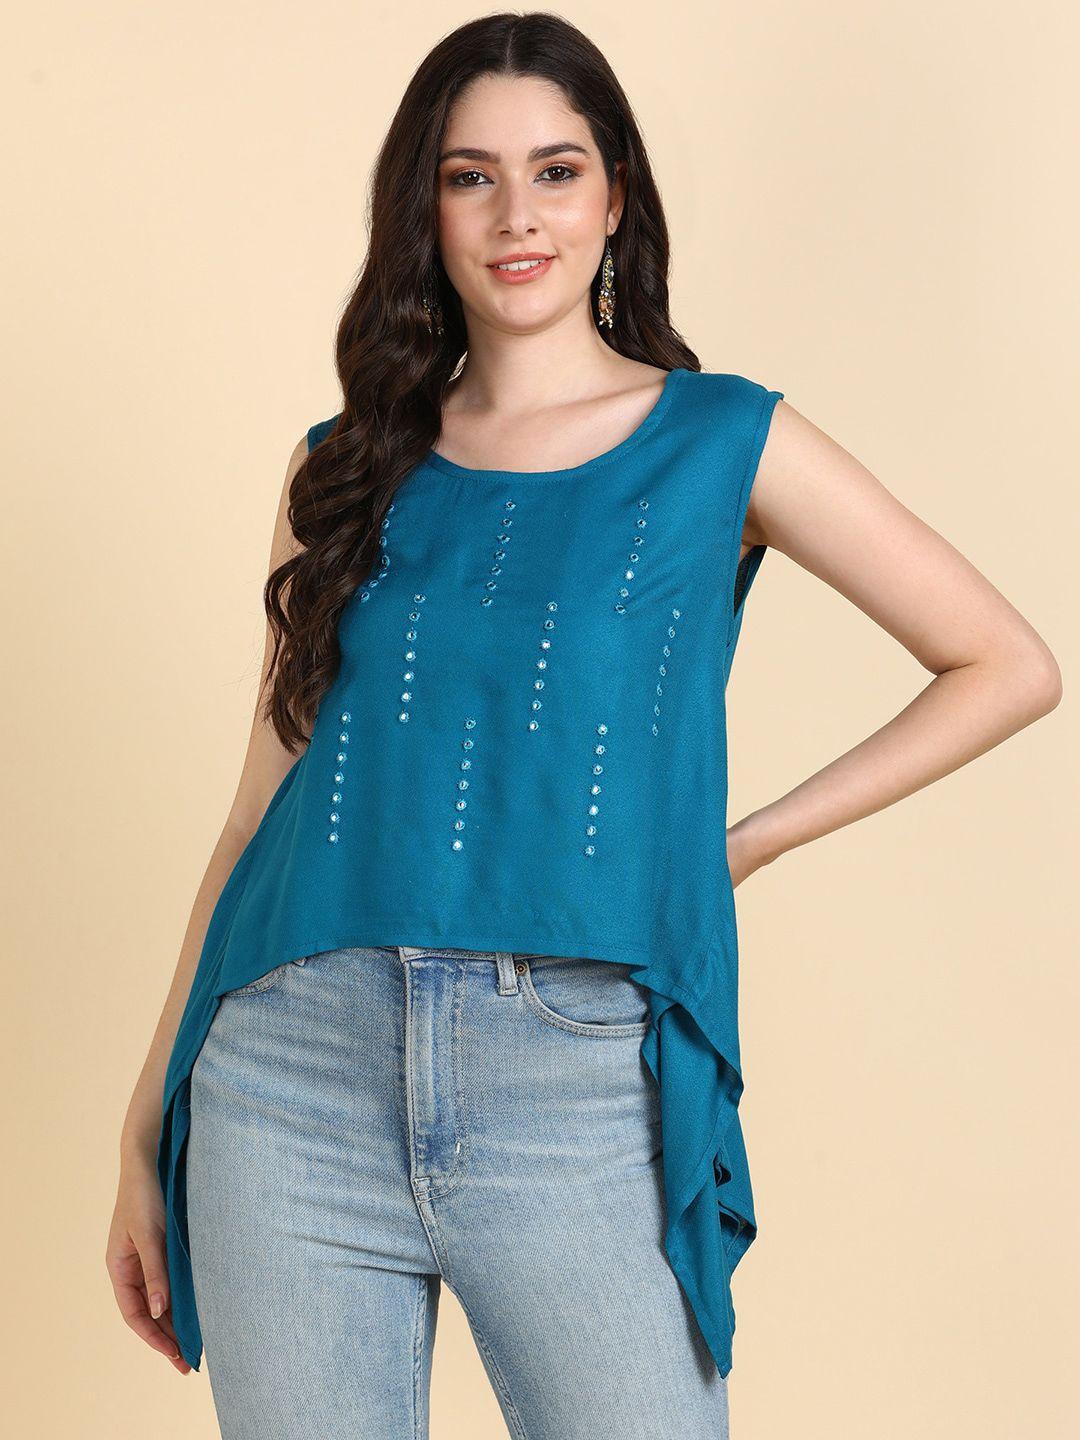 here&now teal high-low top